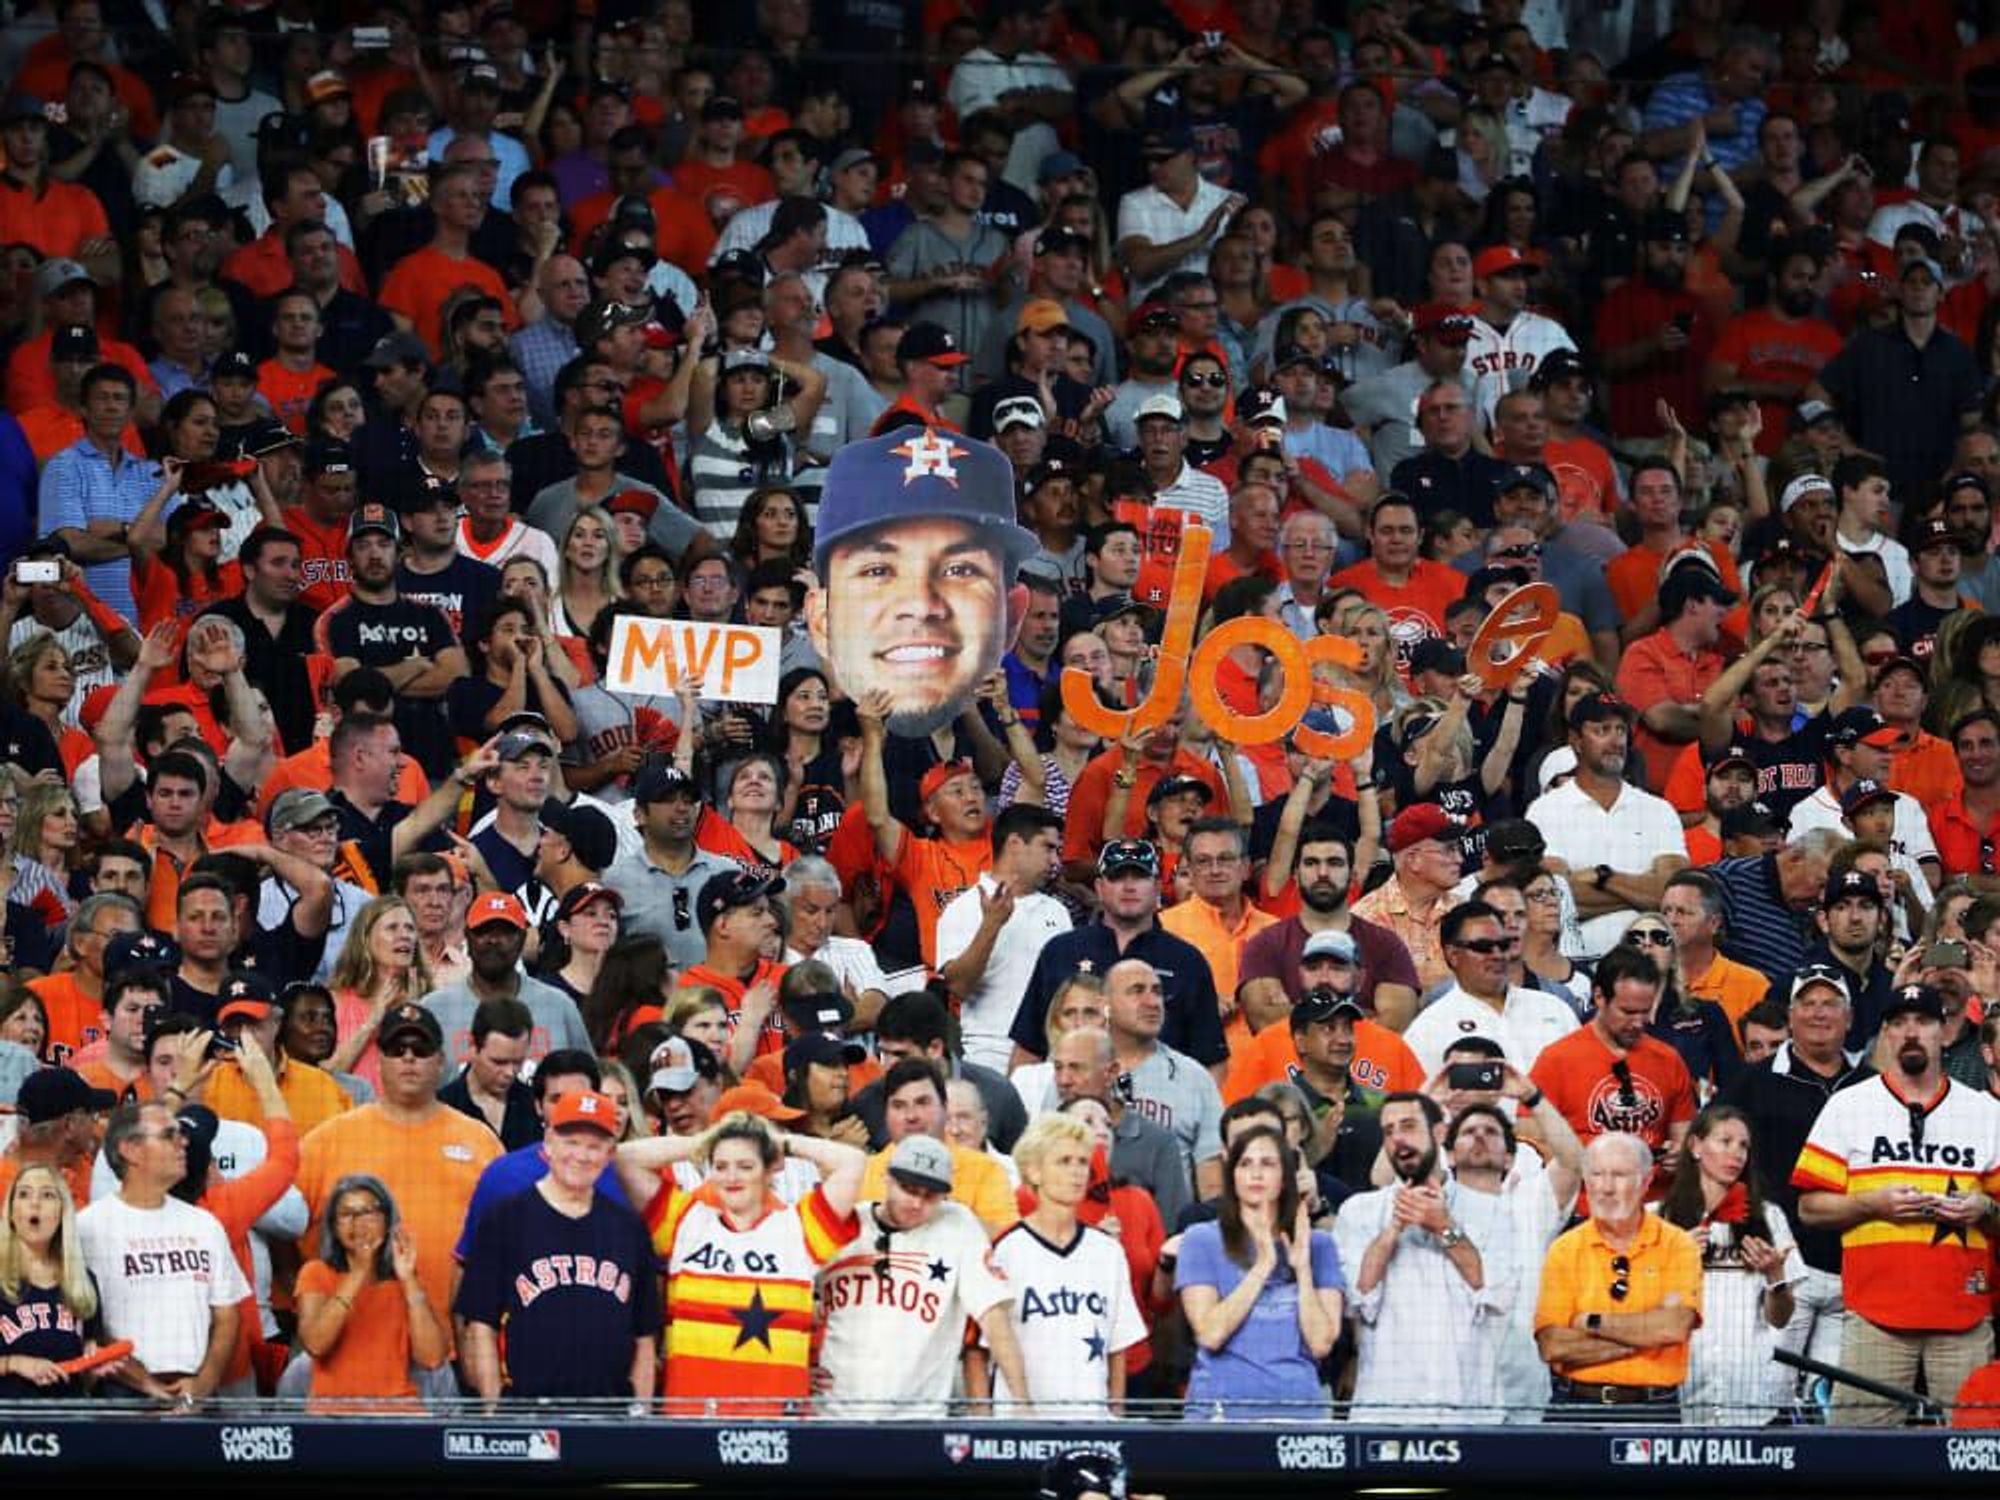 Down in front! Stand up and cheer for the Astros, sure, but the whole game?  - CultureMap Houston